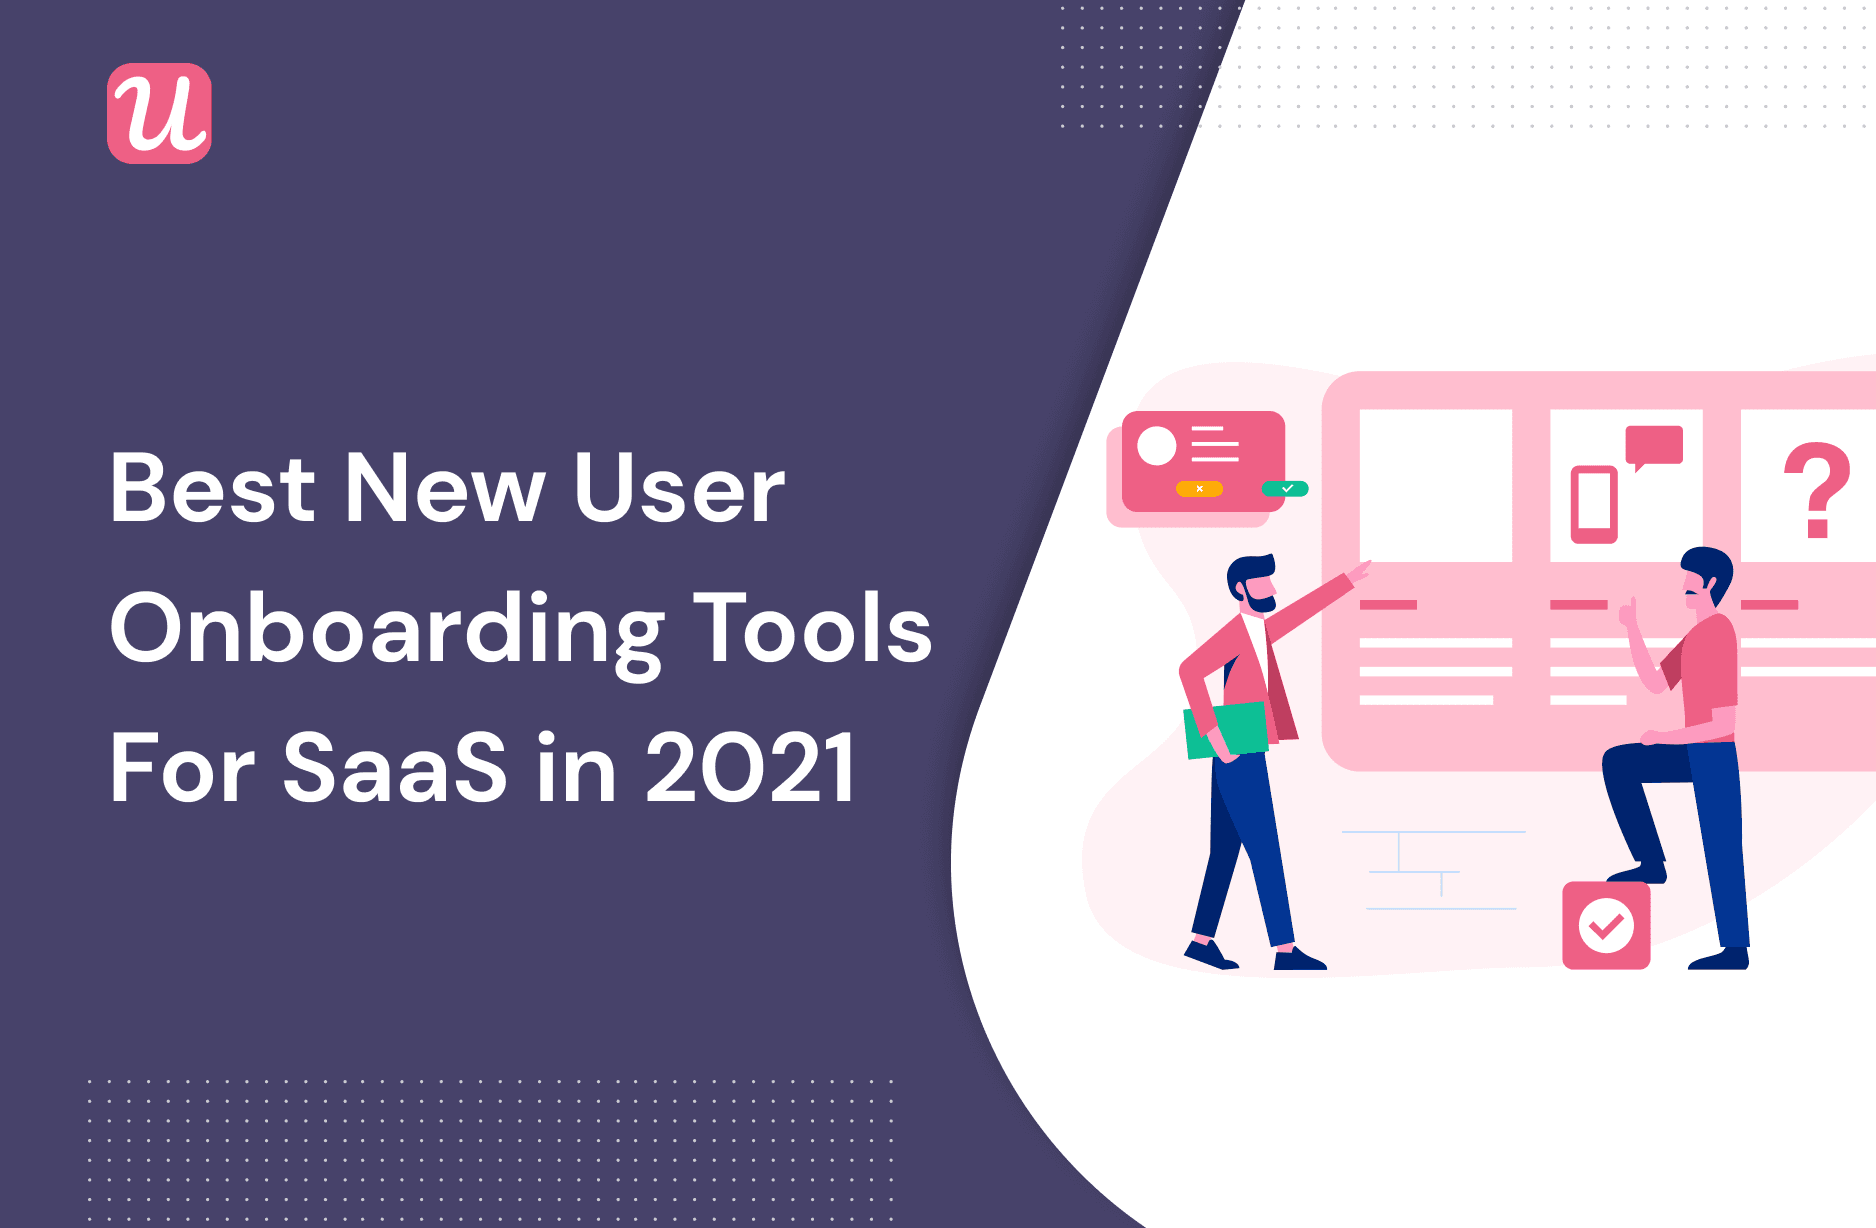 Best New User Onboarding Tools for SaaS in 2021